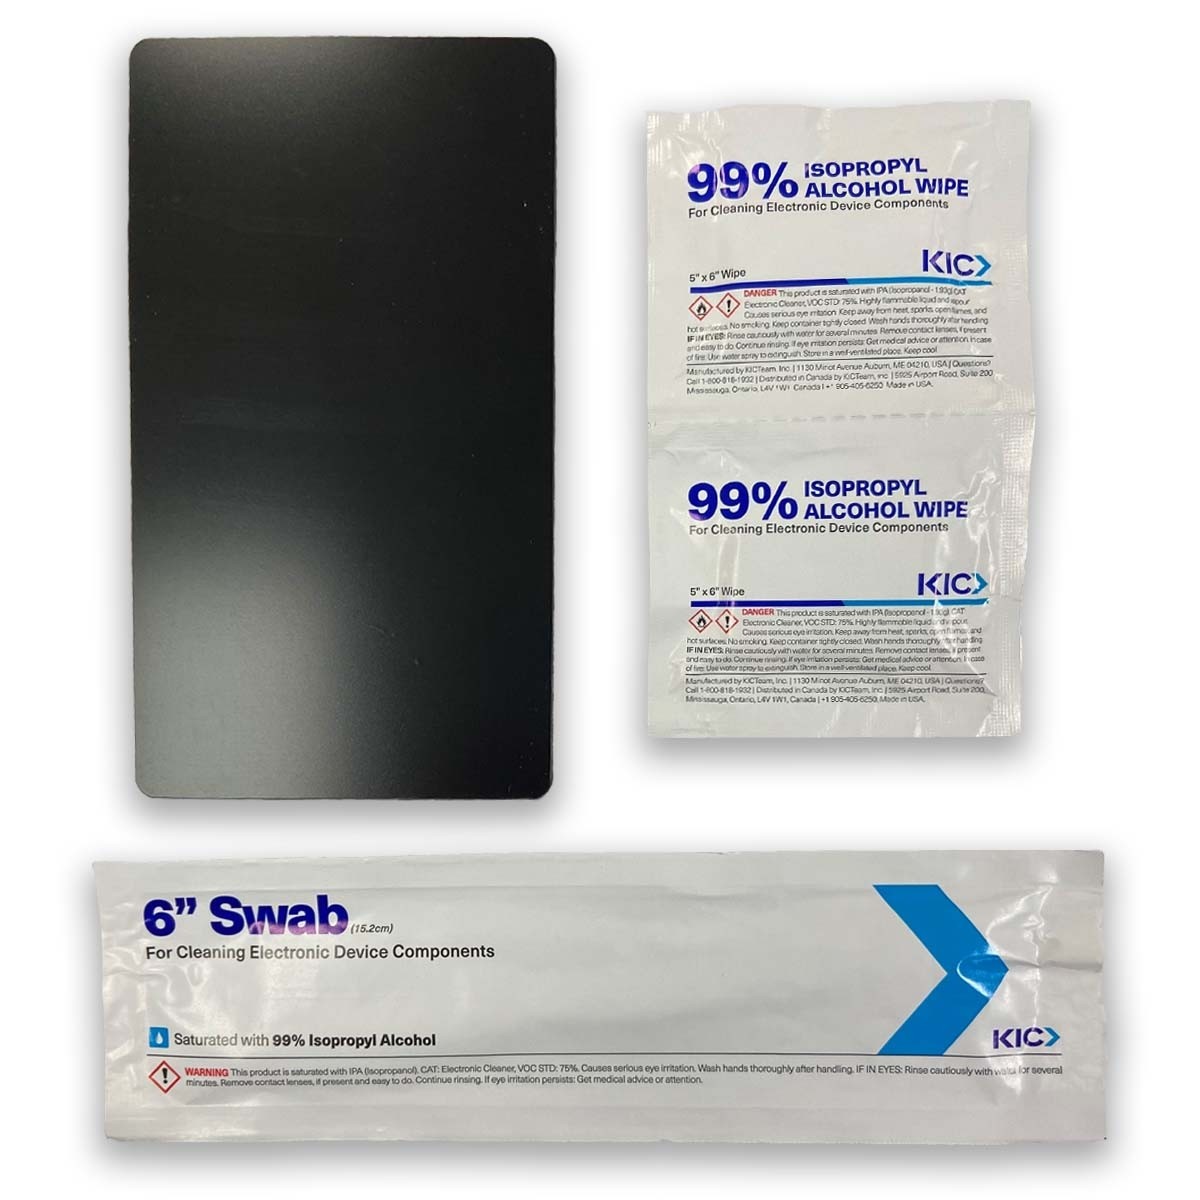 Cleaning Kit containing 10 large cleaning cards, 10 printhead cleaning swabs, and 10 cleaning wipes